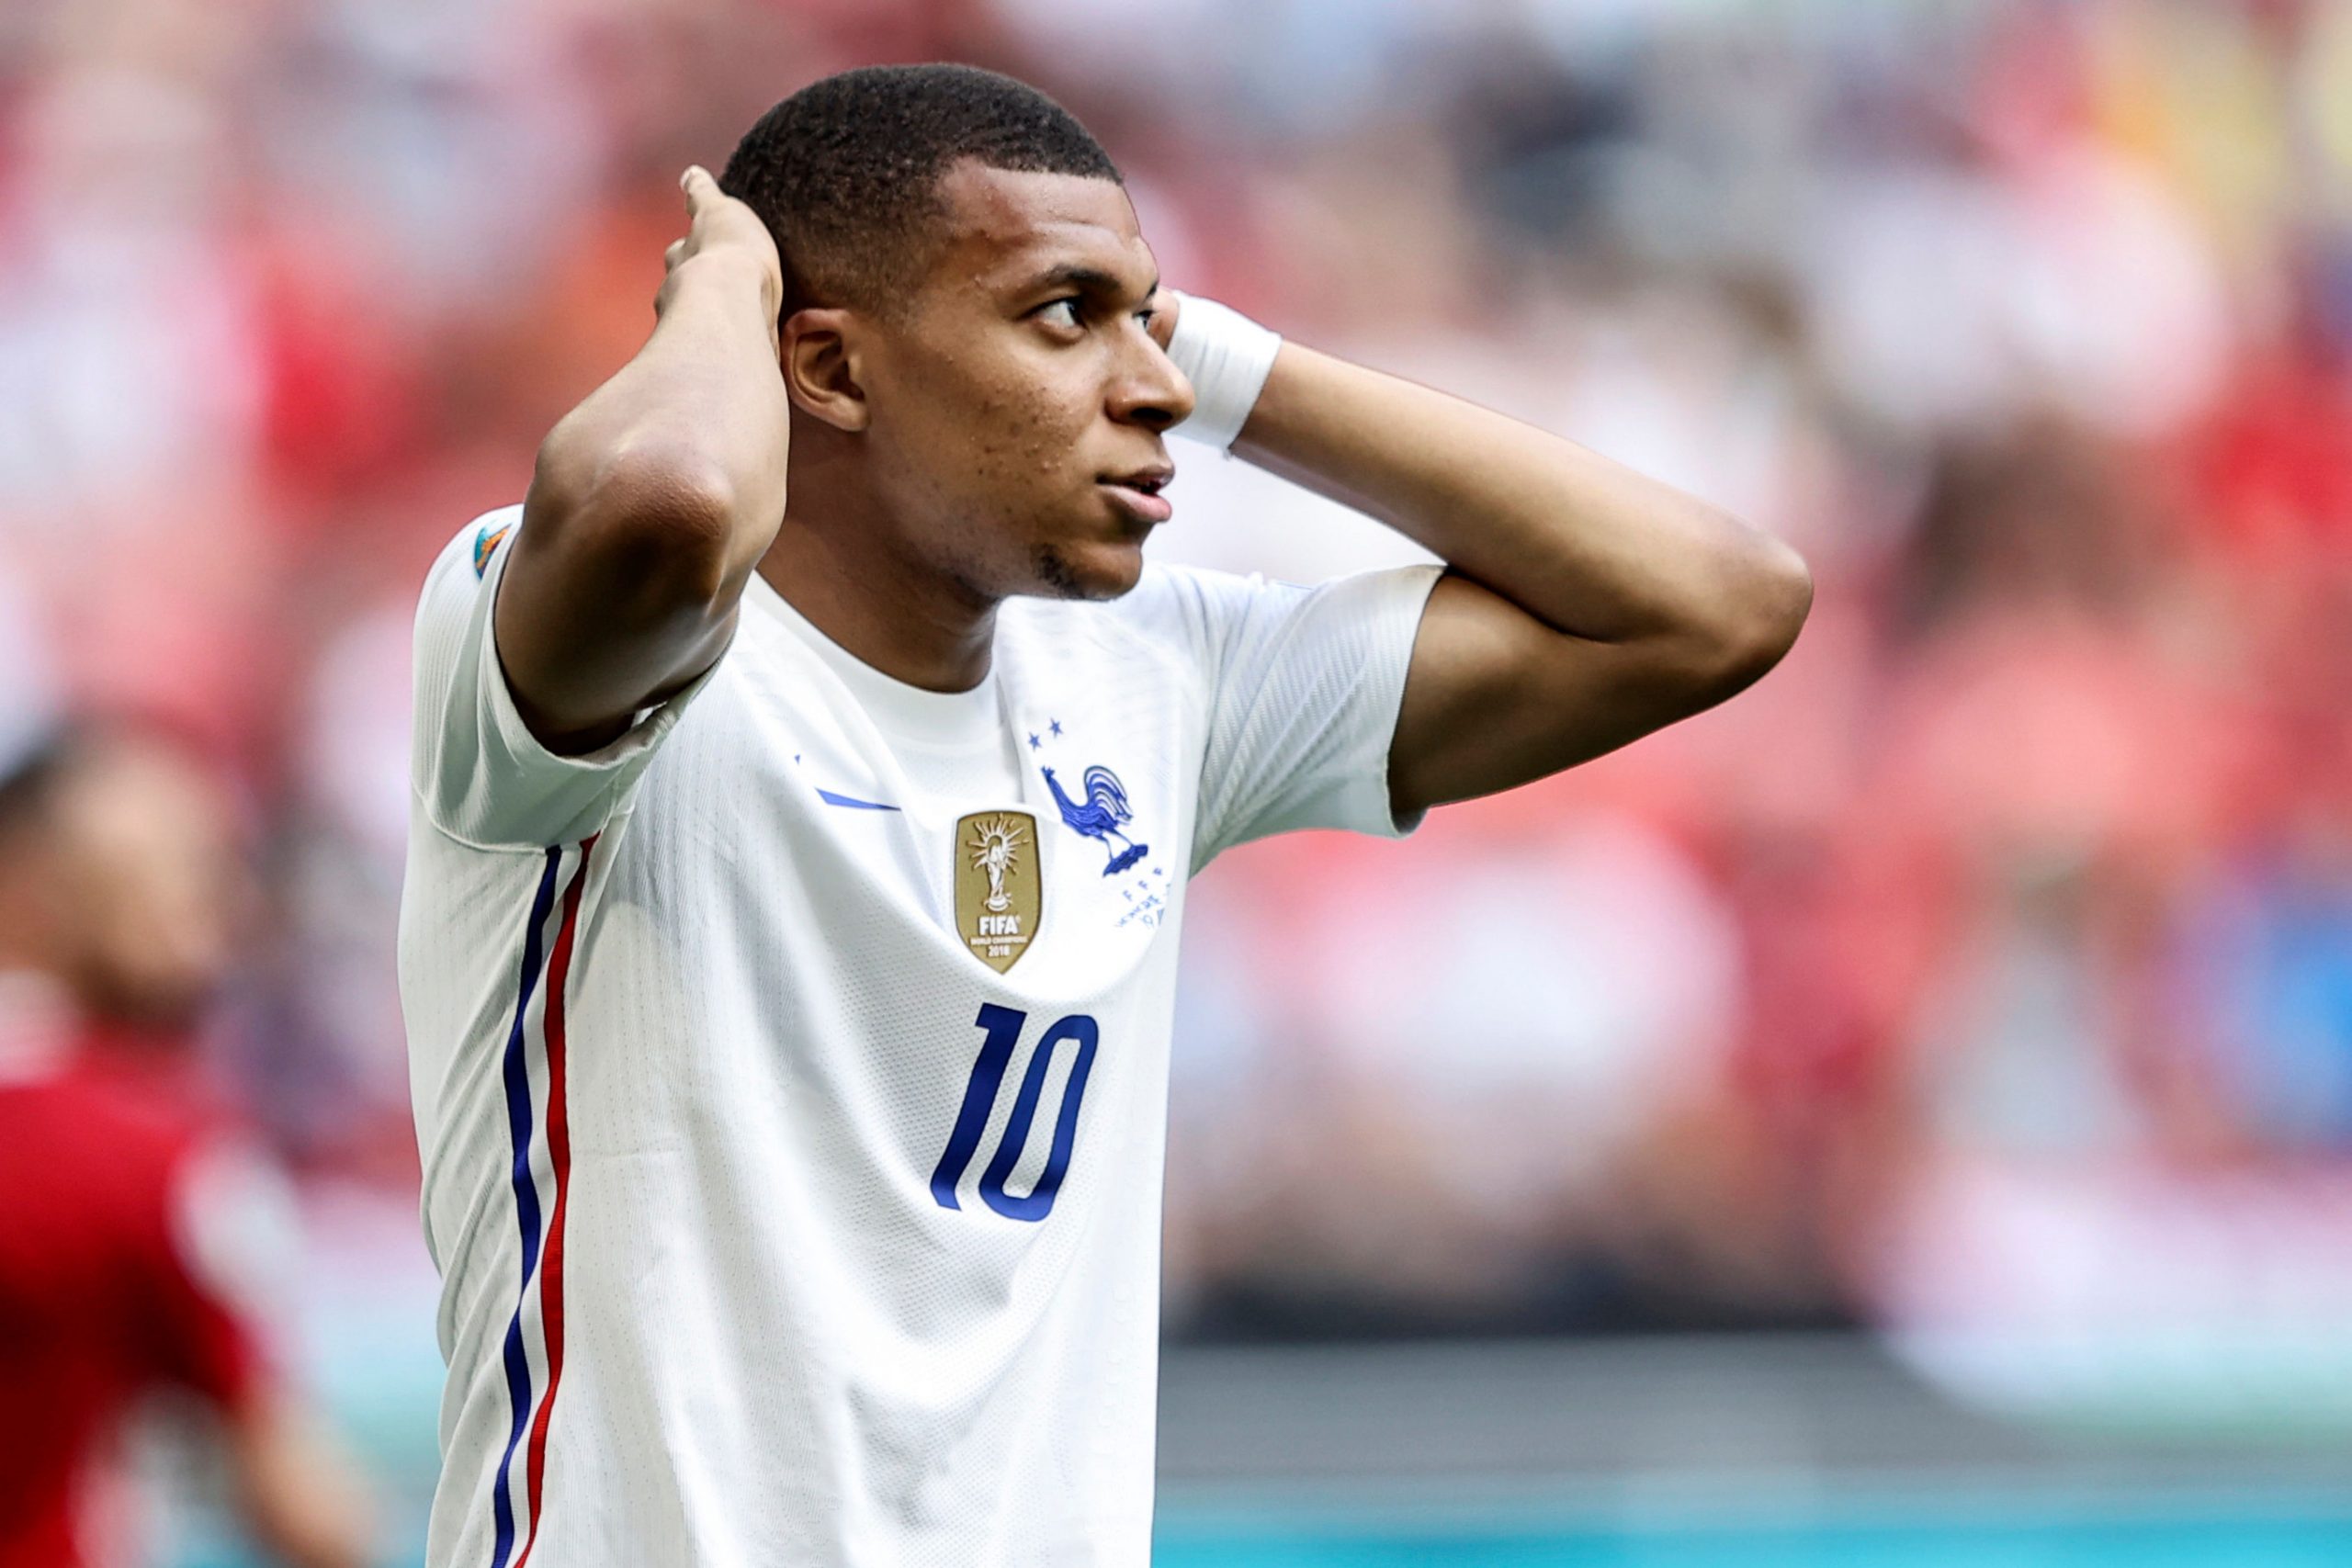 Real Madrid make a second bid for Kylian Mbappe: Reports